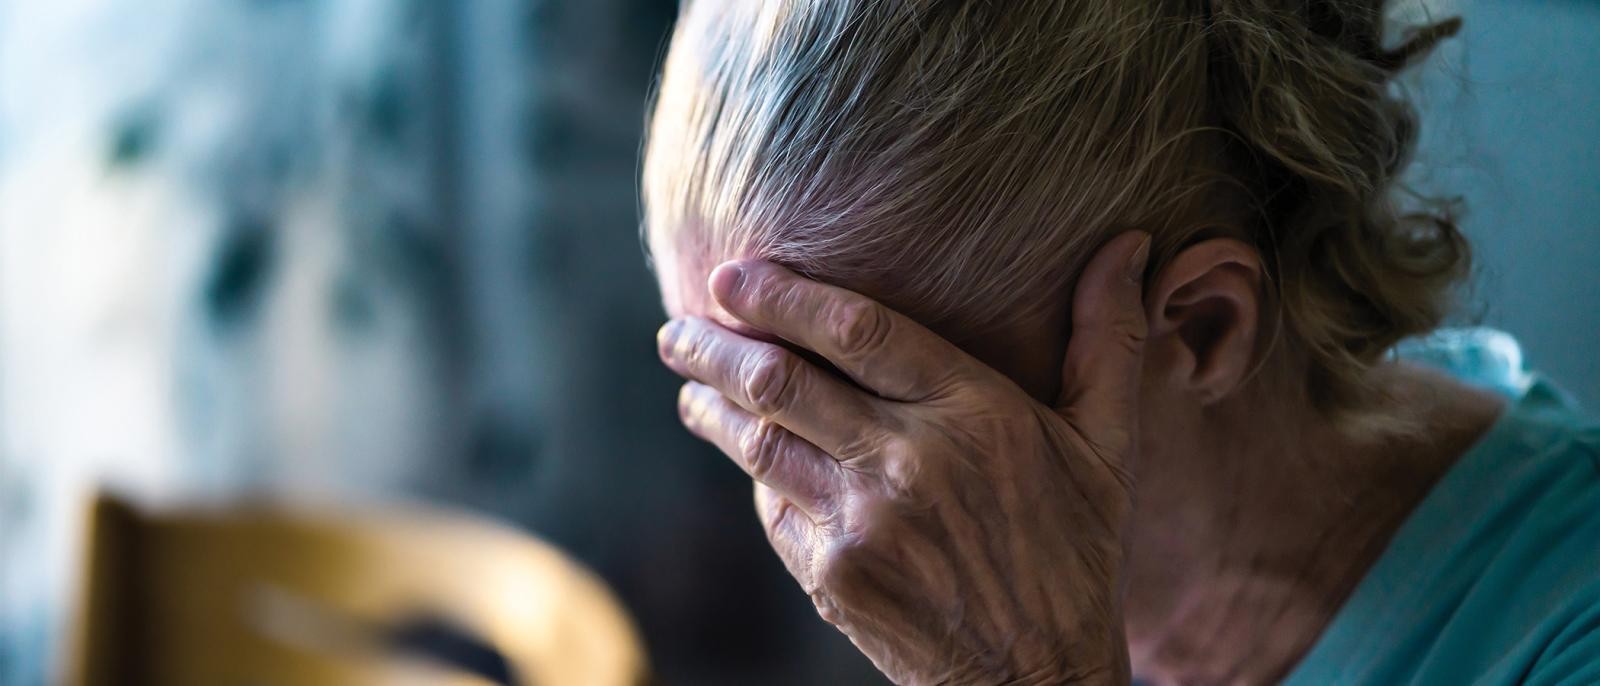 Accelerated Biological Aging May Contribute to Depression and Anxiety